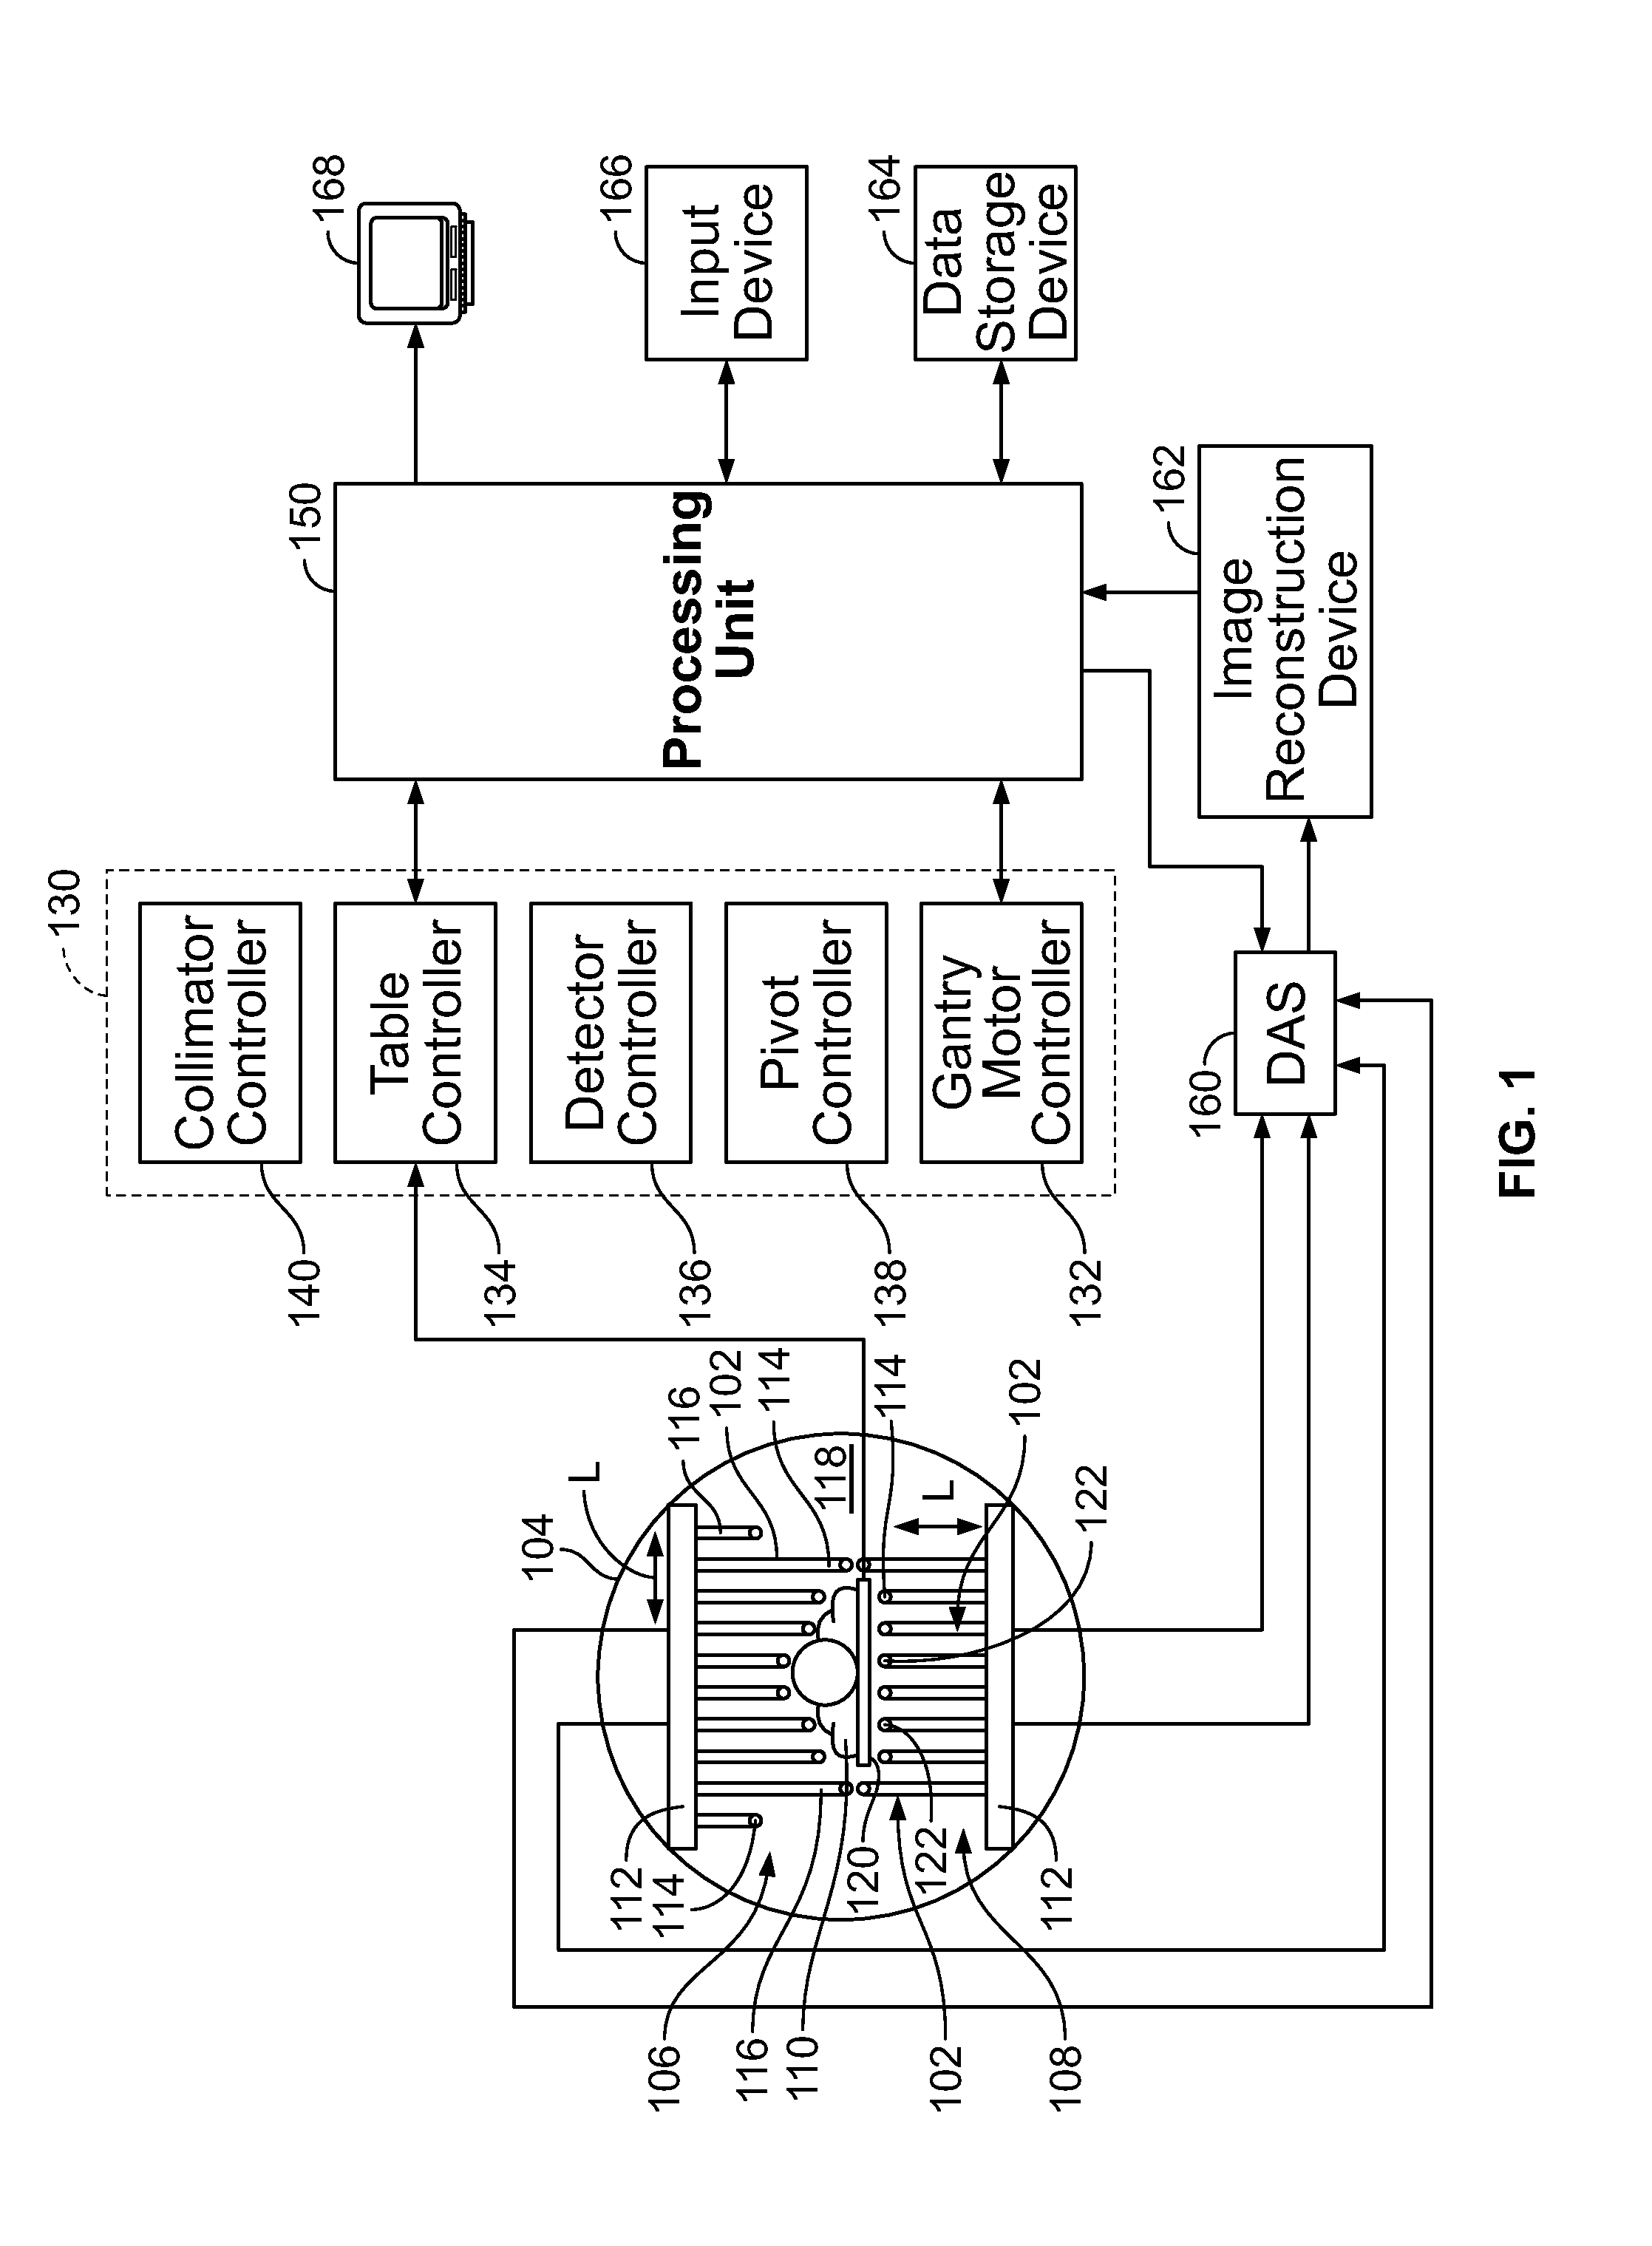 Systems and methods for planar imaging with detectors having moving detector heads